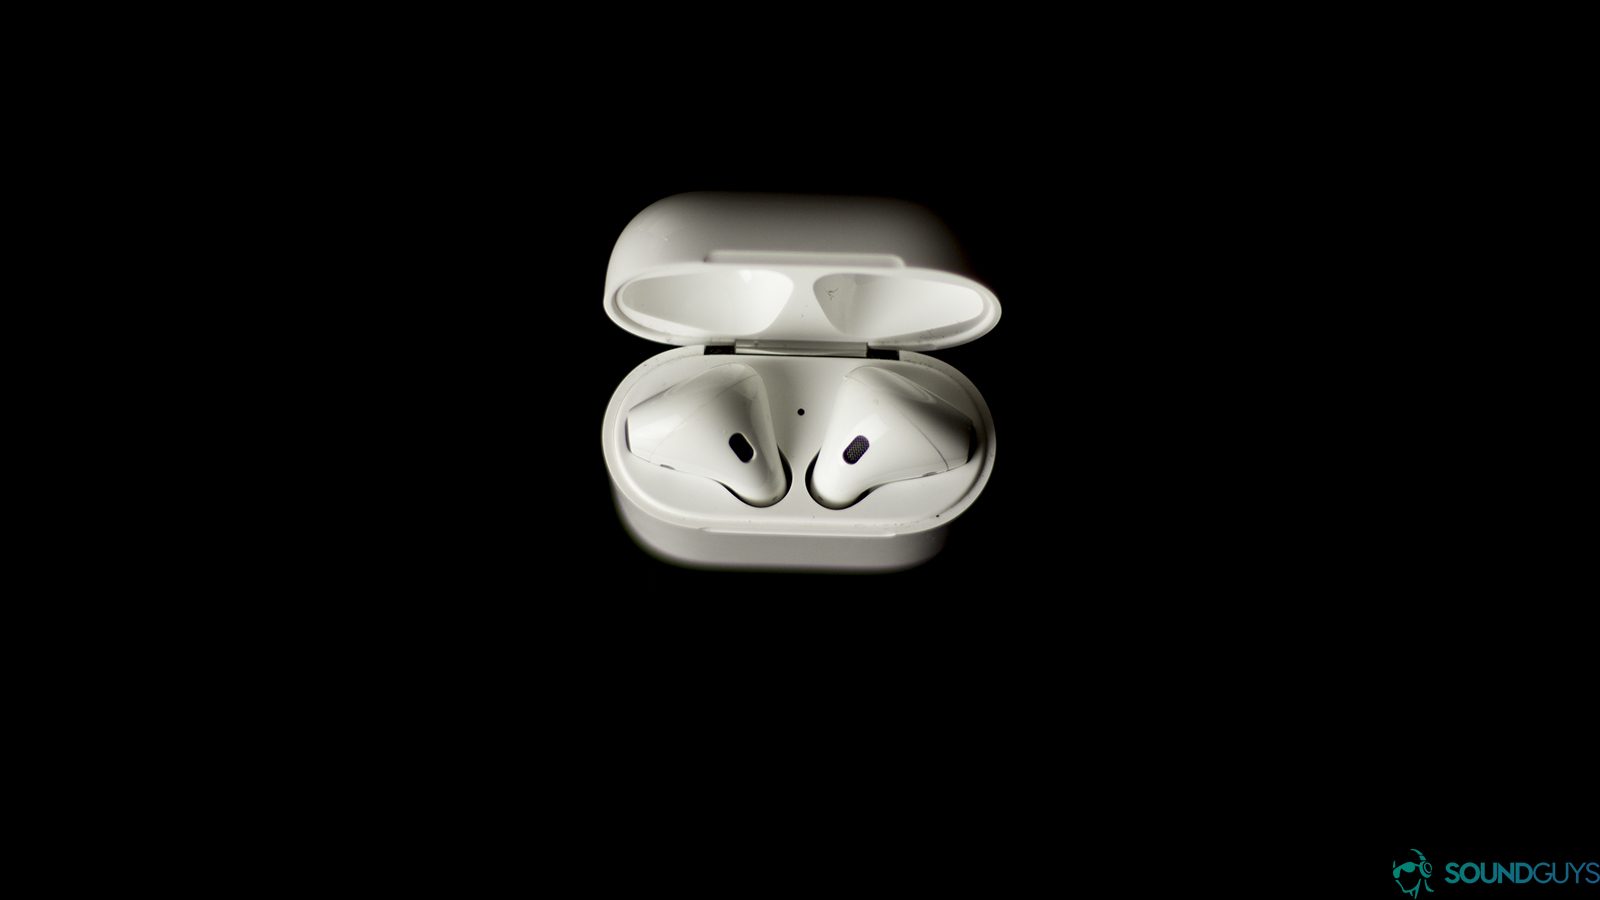 An aerial image of the Airpods charging case with an all black background for a comparison in the Apple AirPods vs Samsung Galaxy Buds Live breakdown.